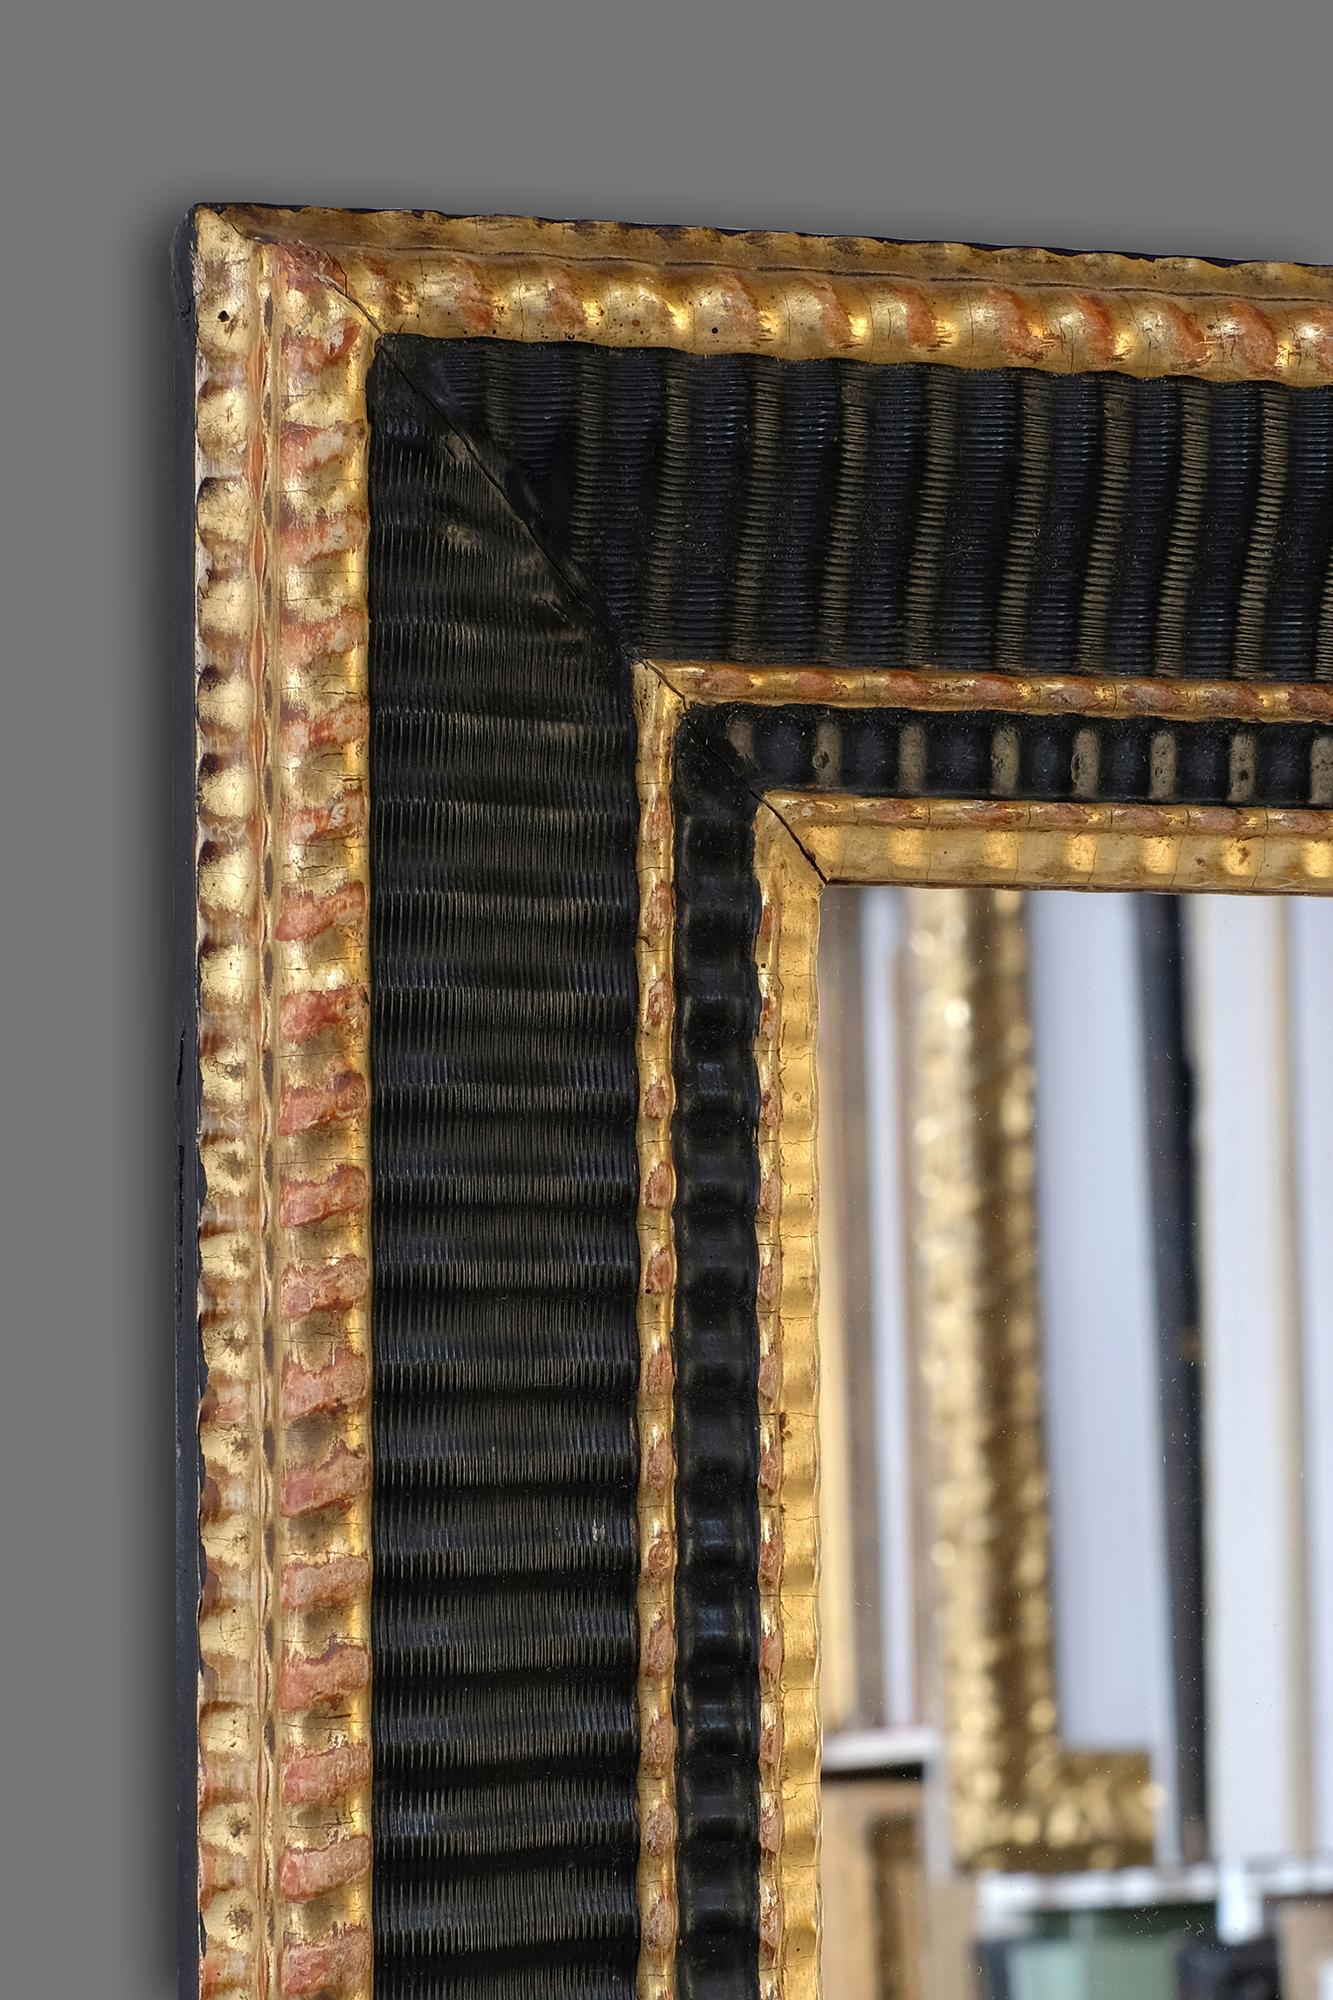 An eye-catching late 19th-early 20th century French Artist's frame. It has a reeded ogee profile with wave moulding and the frame retains its well preserved original parcel gilding and black tempera. Further information on this style of frame